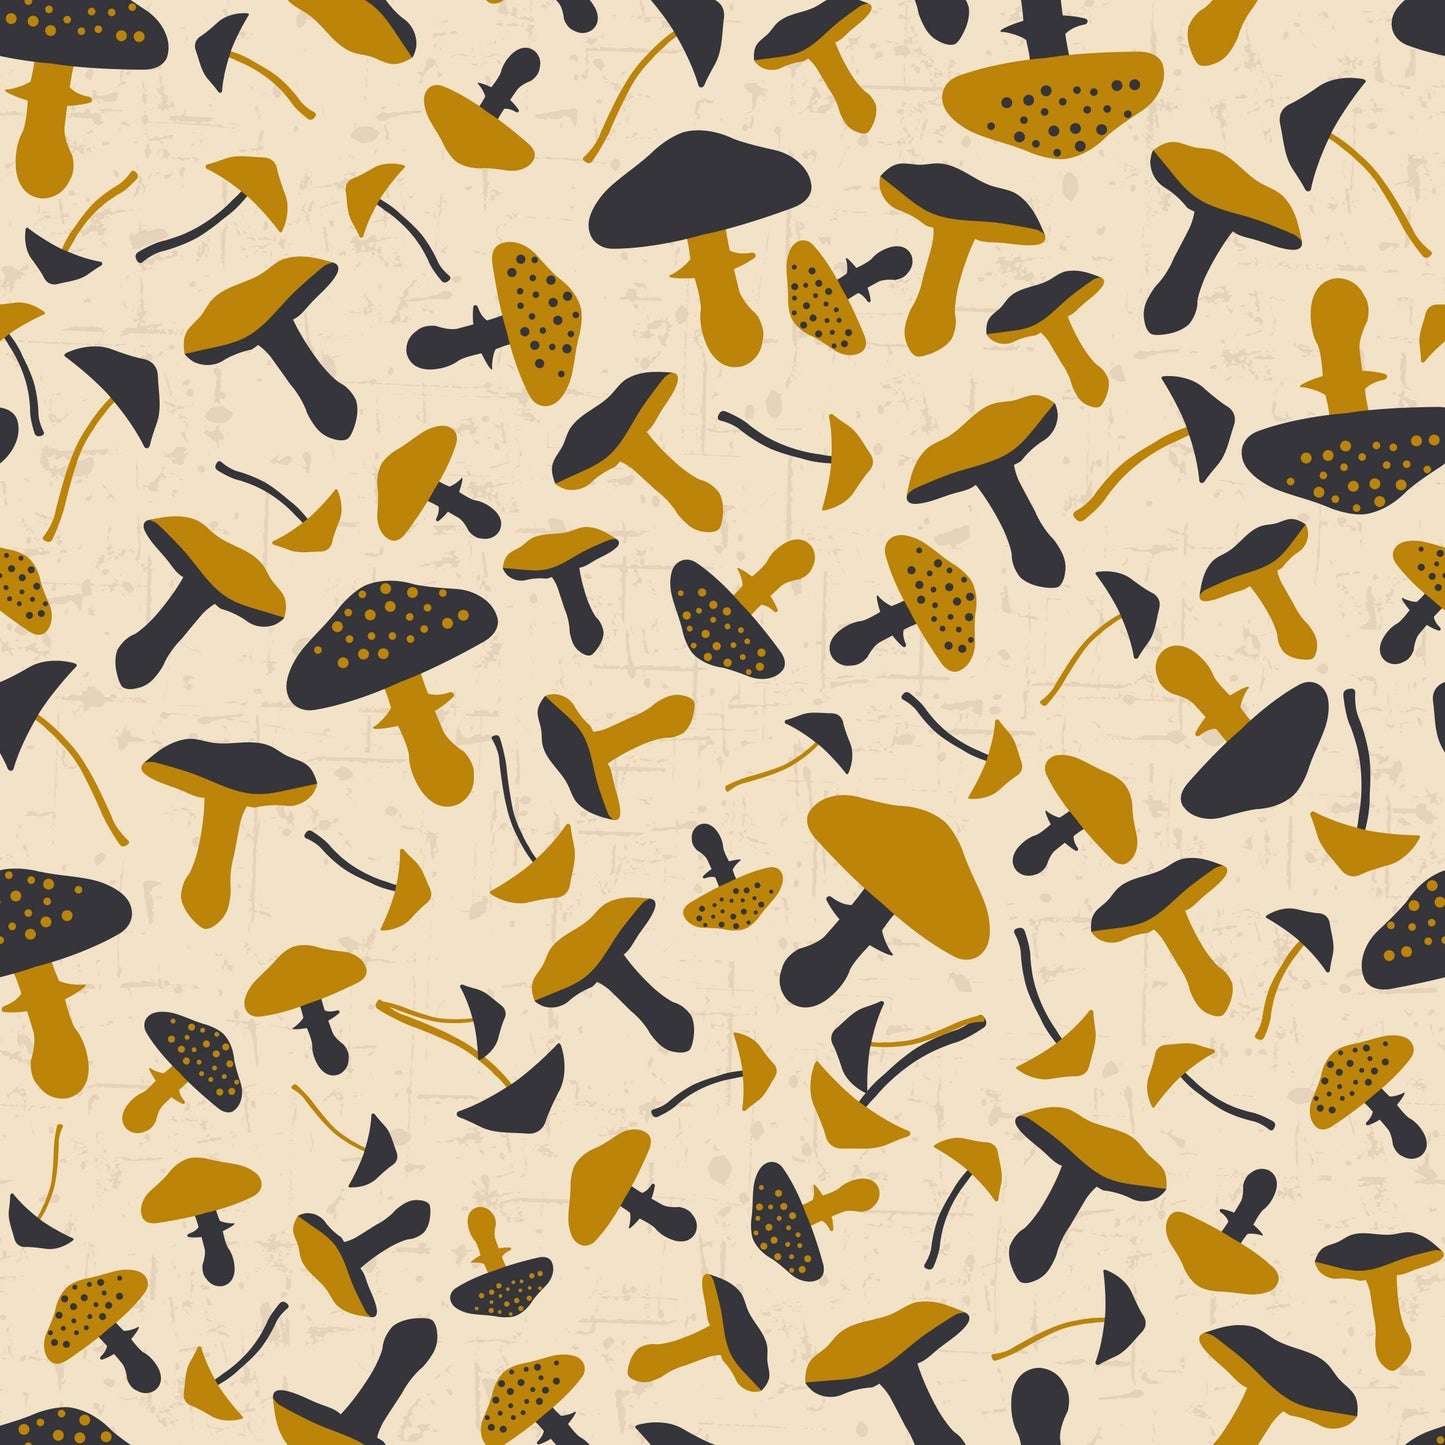 Birds on the Move Black and Yellow Mushrooms on Sand 4501-419 Digitally Printed Cotton Woven Fabric